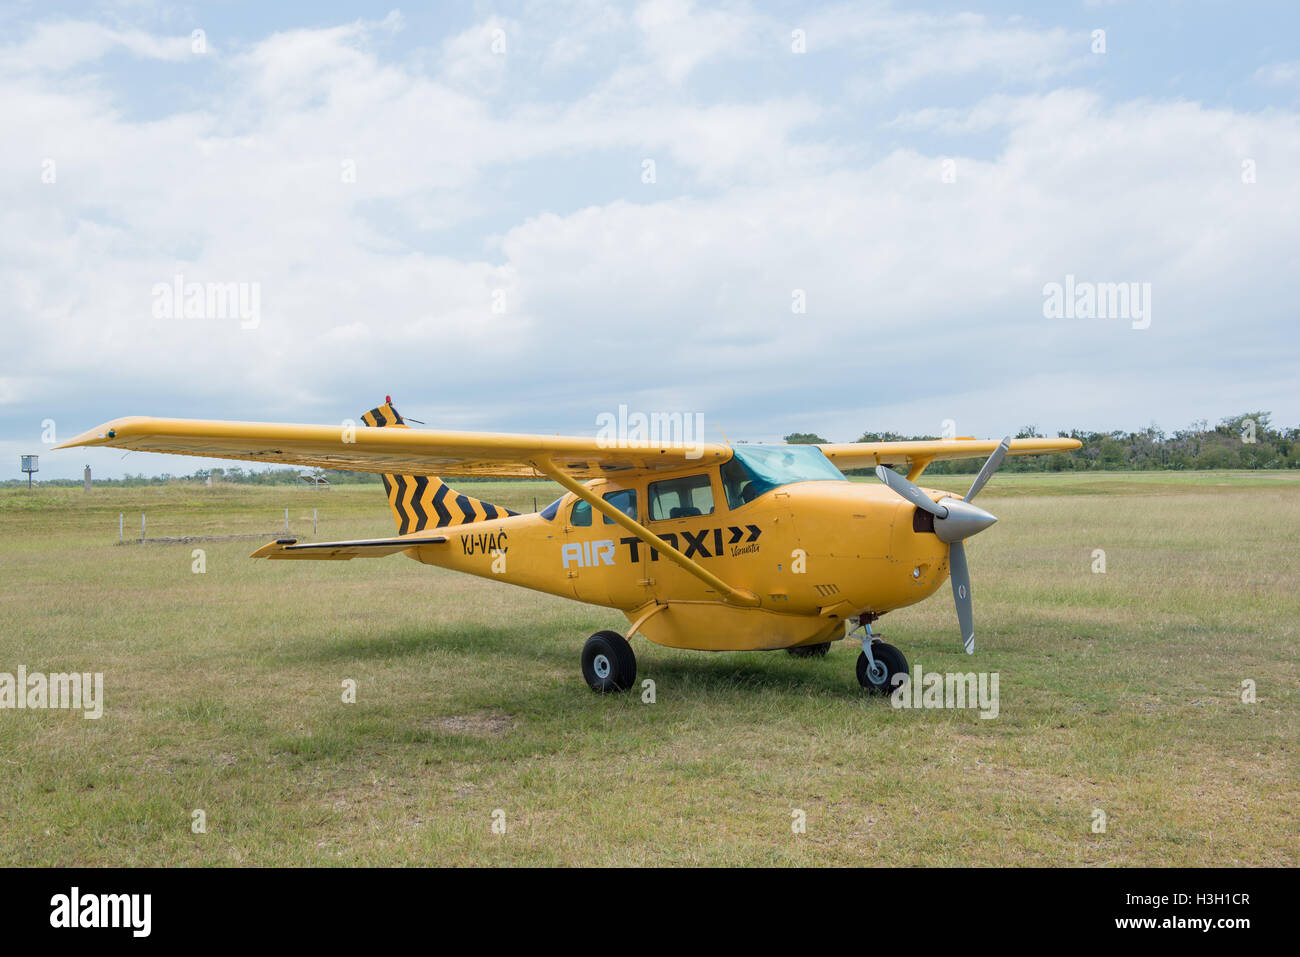 Luganvile, Vanuatu, September 27 2016: A yellow Cessna 2016 from AIR TAXI Vanutu on the airfield Stock Photo